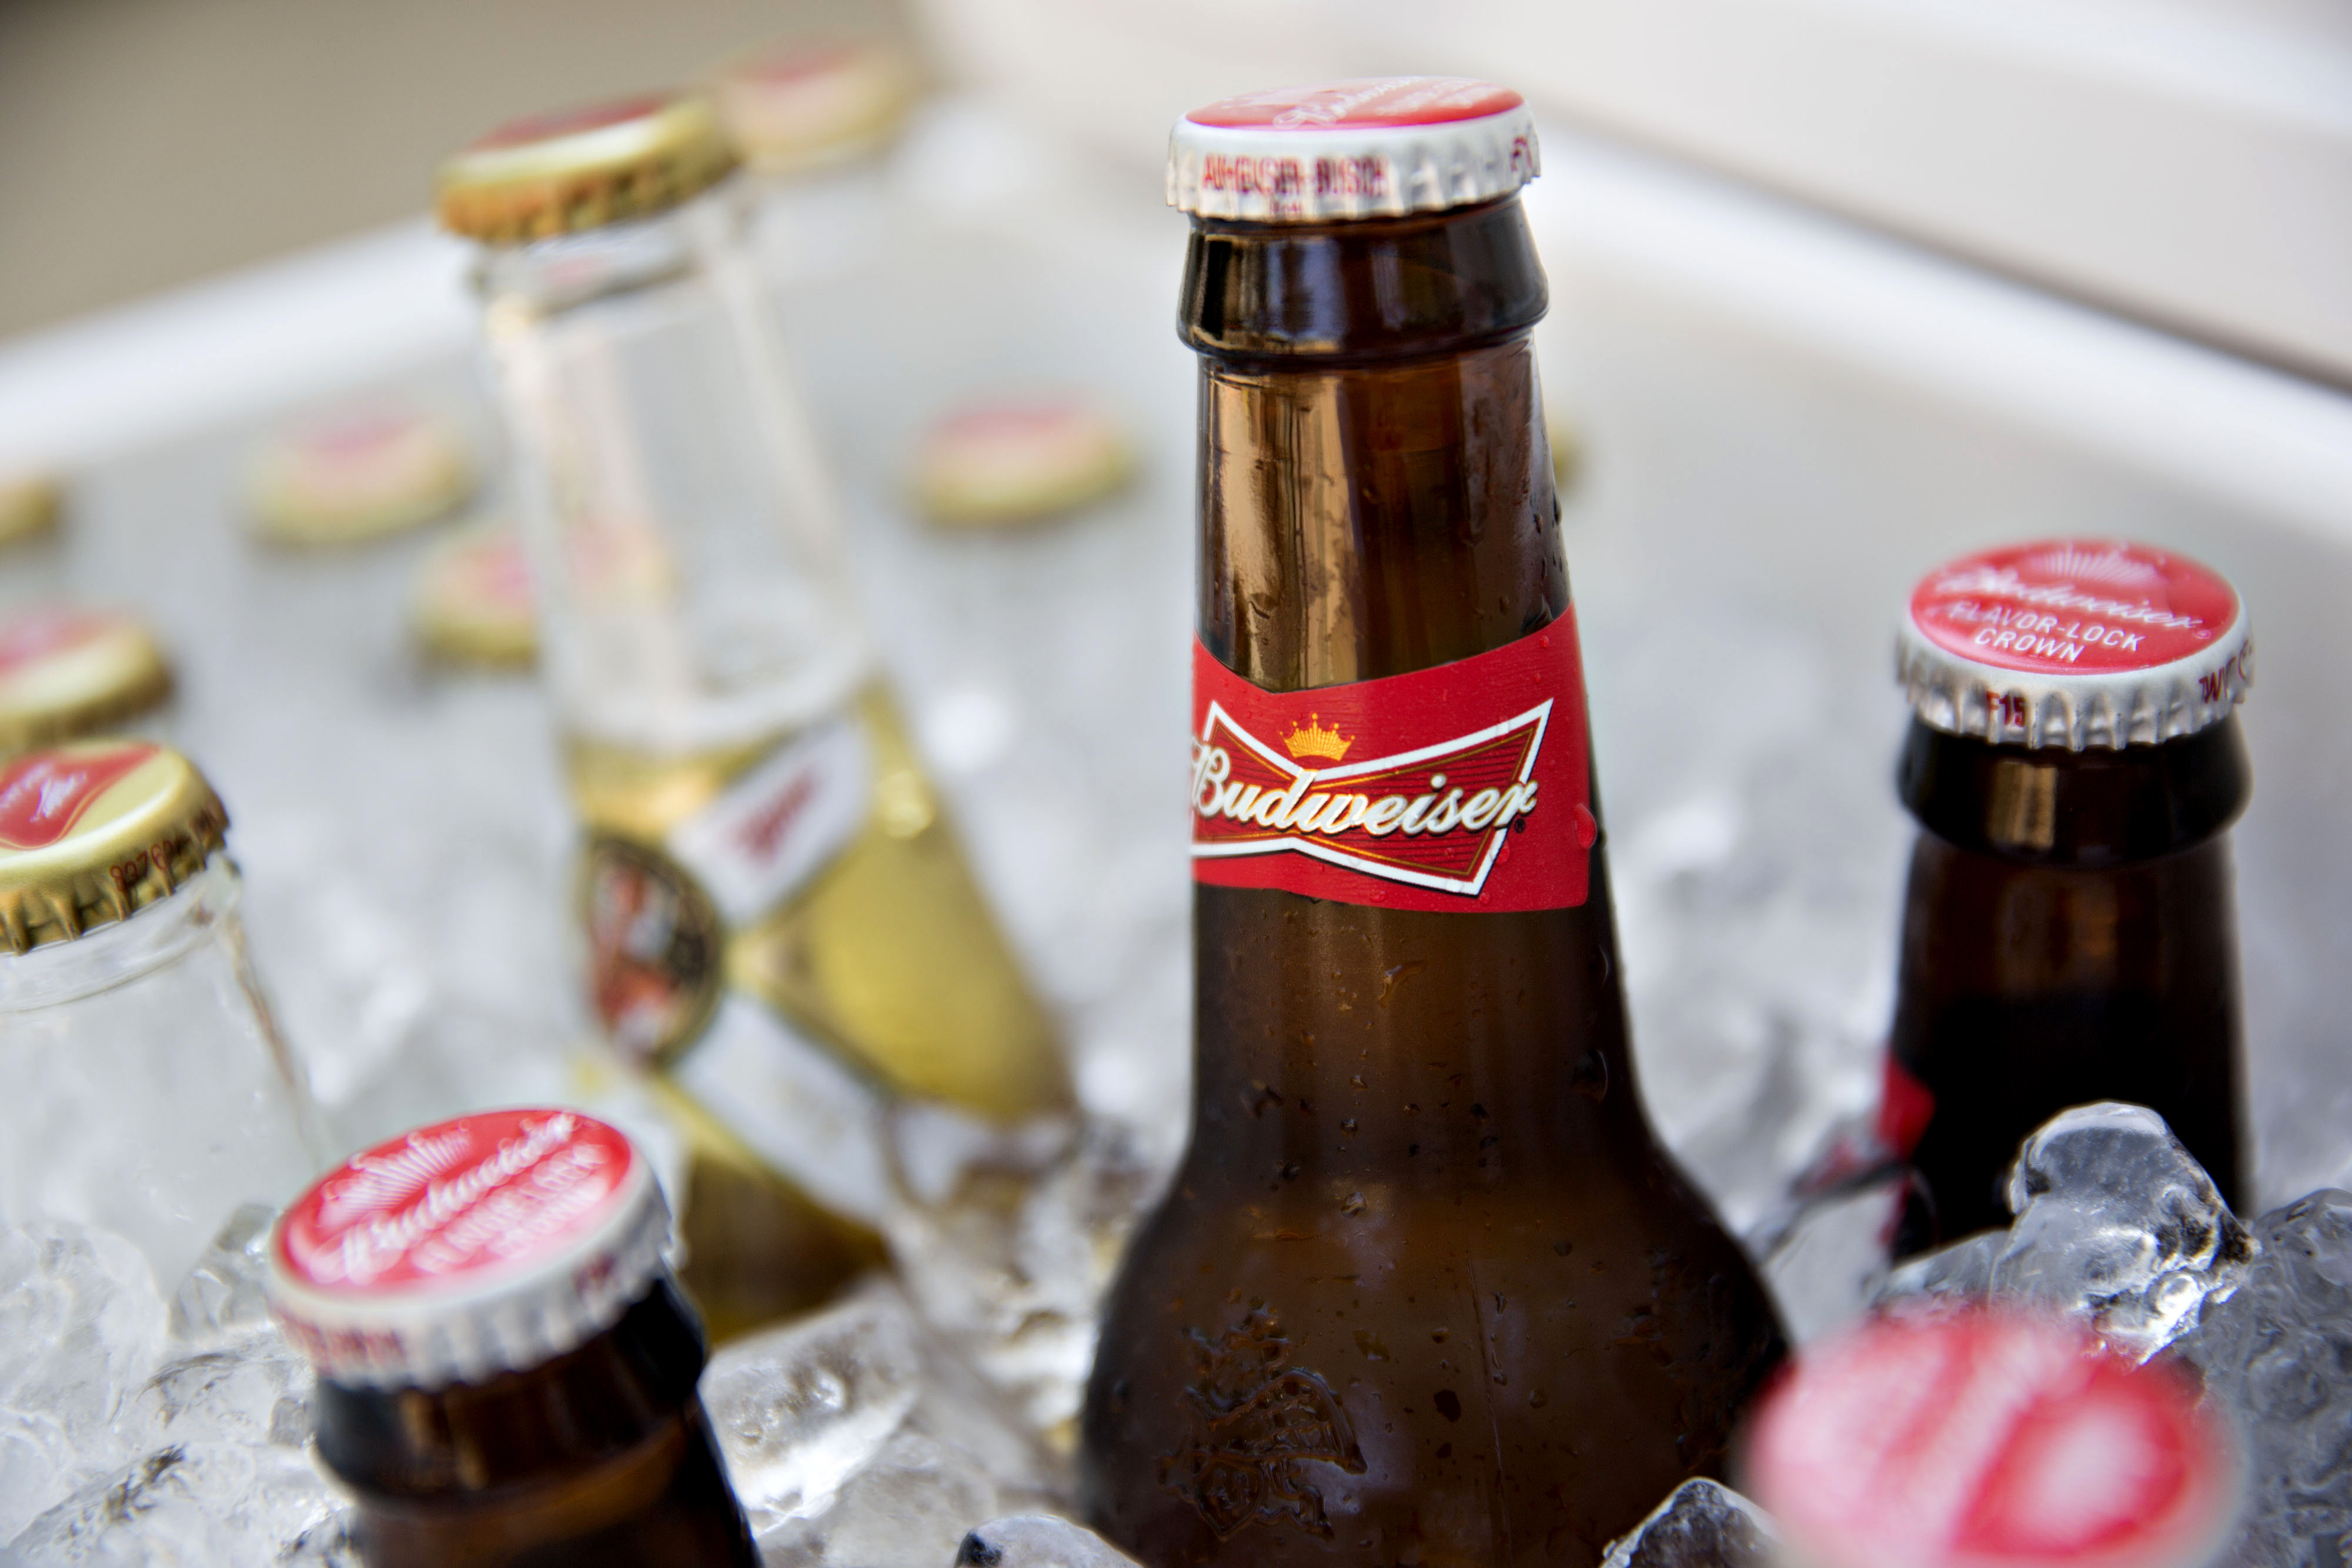 Bud Light and Budweiser's reputation under fire—are other AB-InBev brands  weathering the storm?